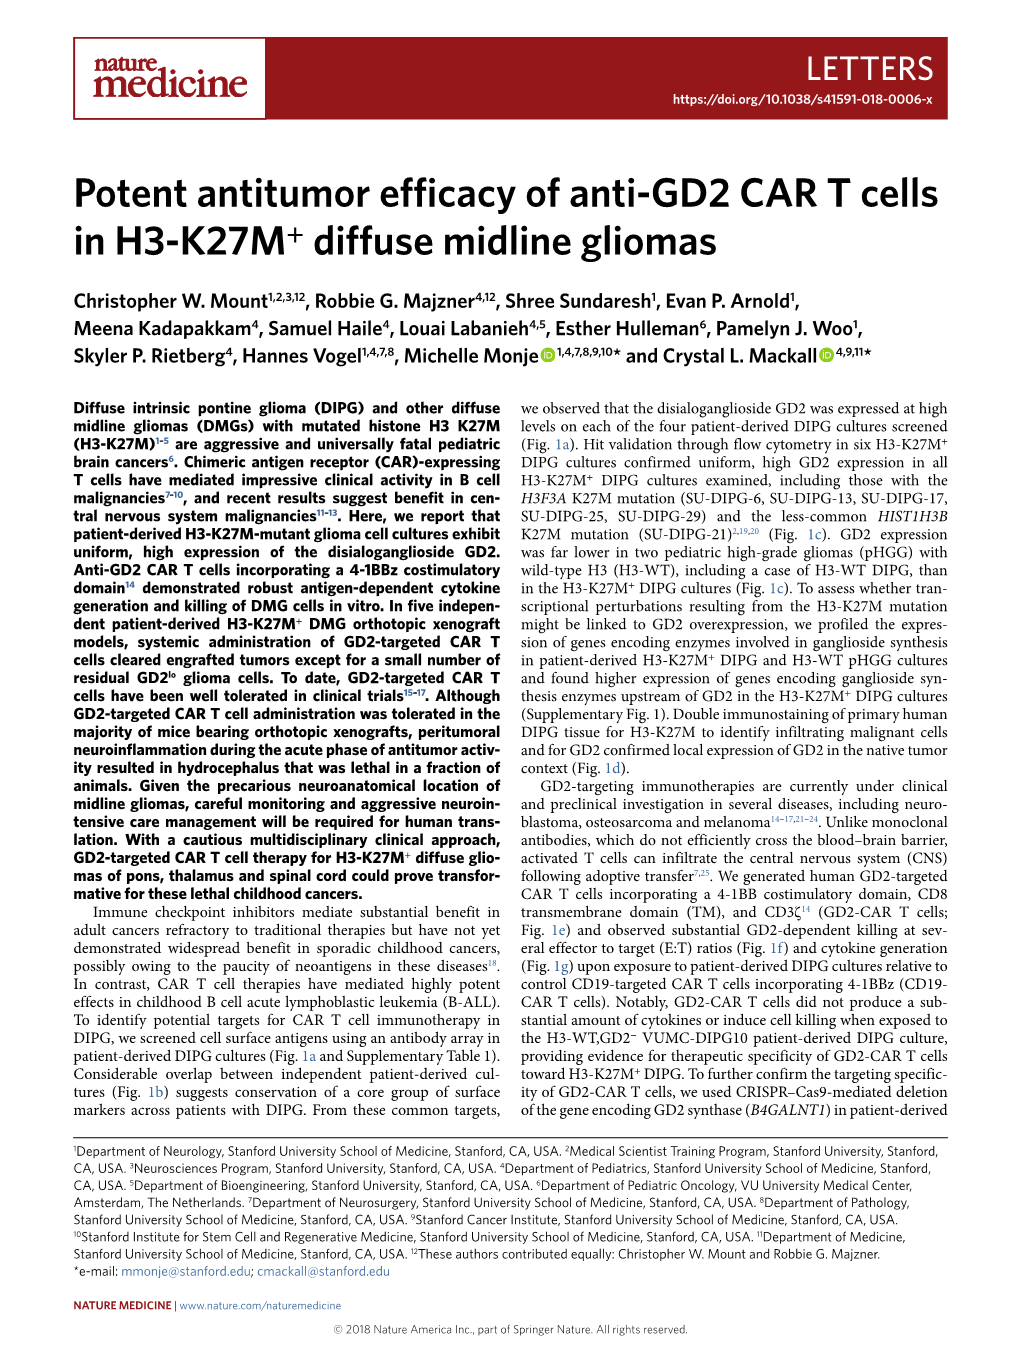 Potent Antitumor Efficacy of Anti-GD2 CAR T Cells in H3-K27M+ Diffuse Midline Gliomas